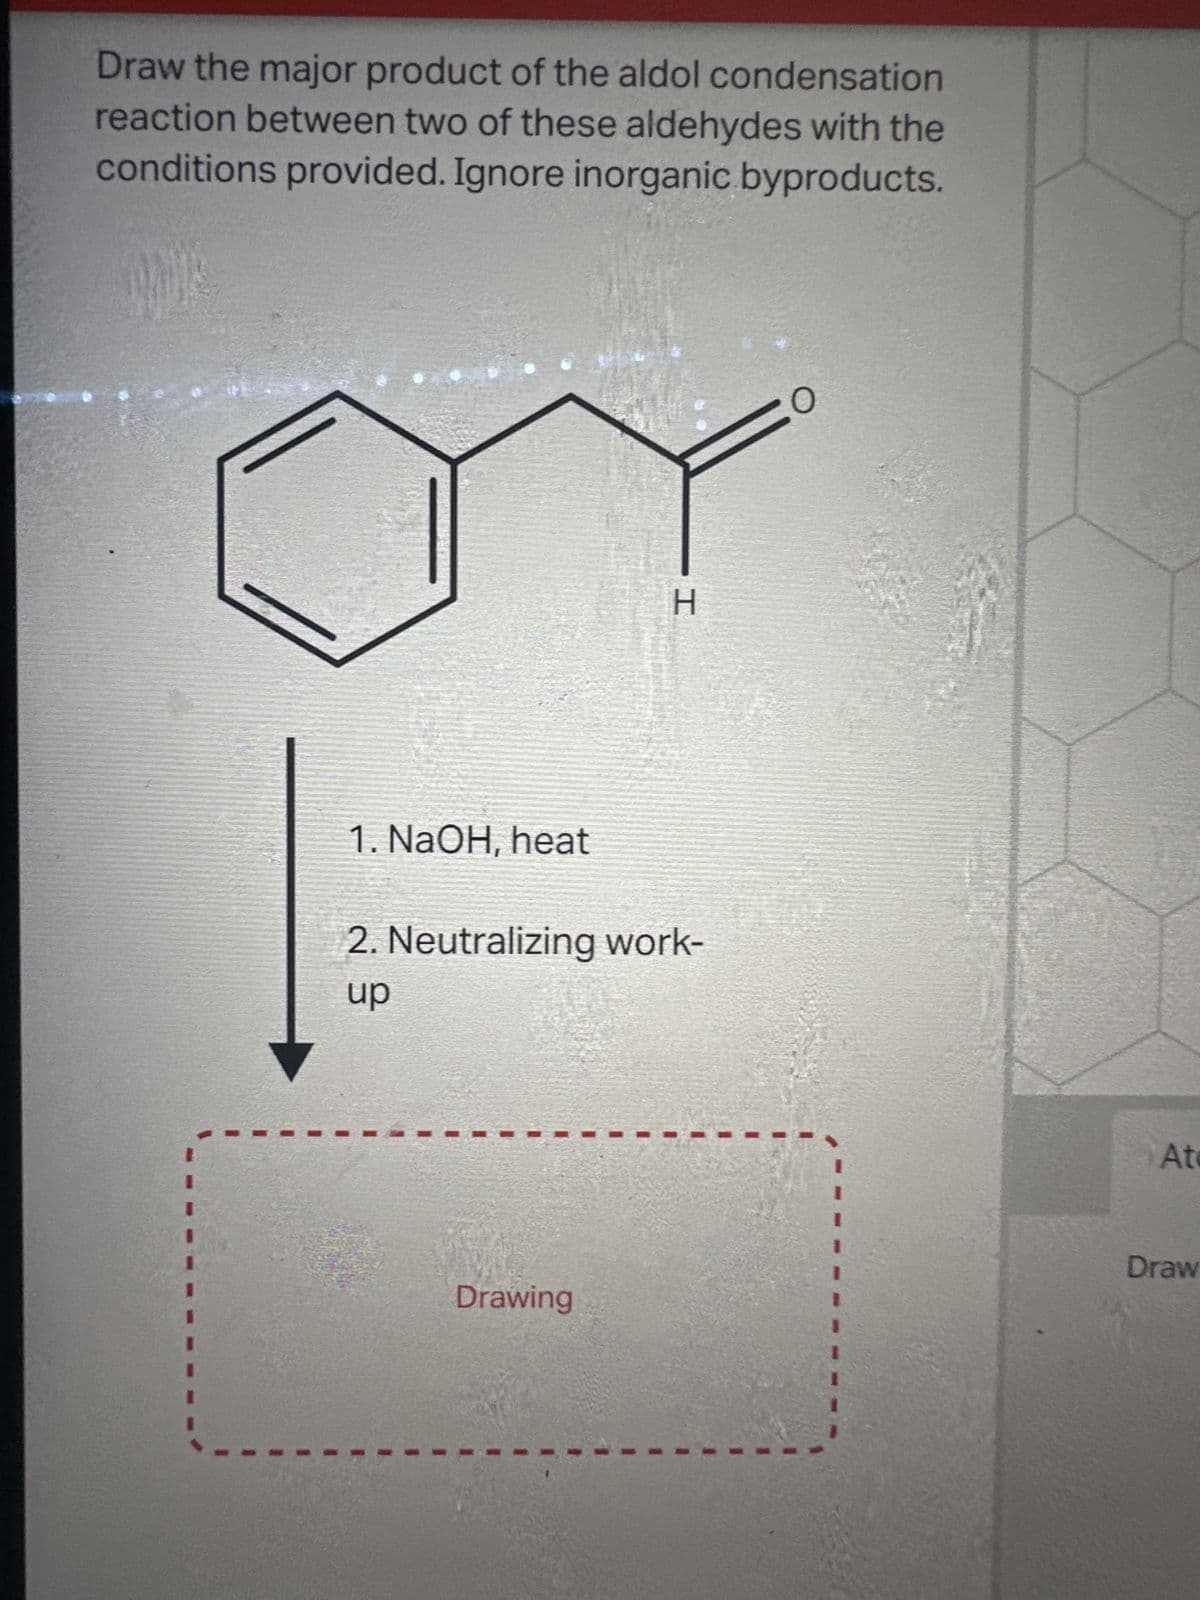 Draw the major product of the aldol condensation
reaction between two of these aldehydes with the
conditions provided. Ignore inorganic byproducts.
1. NaOH, heat
H
2. Neutralizing work-
up
Drawing
1
1
At
Draw